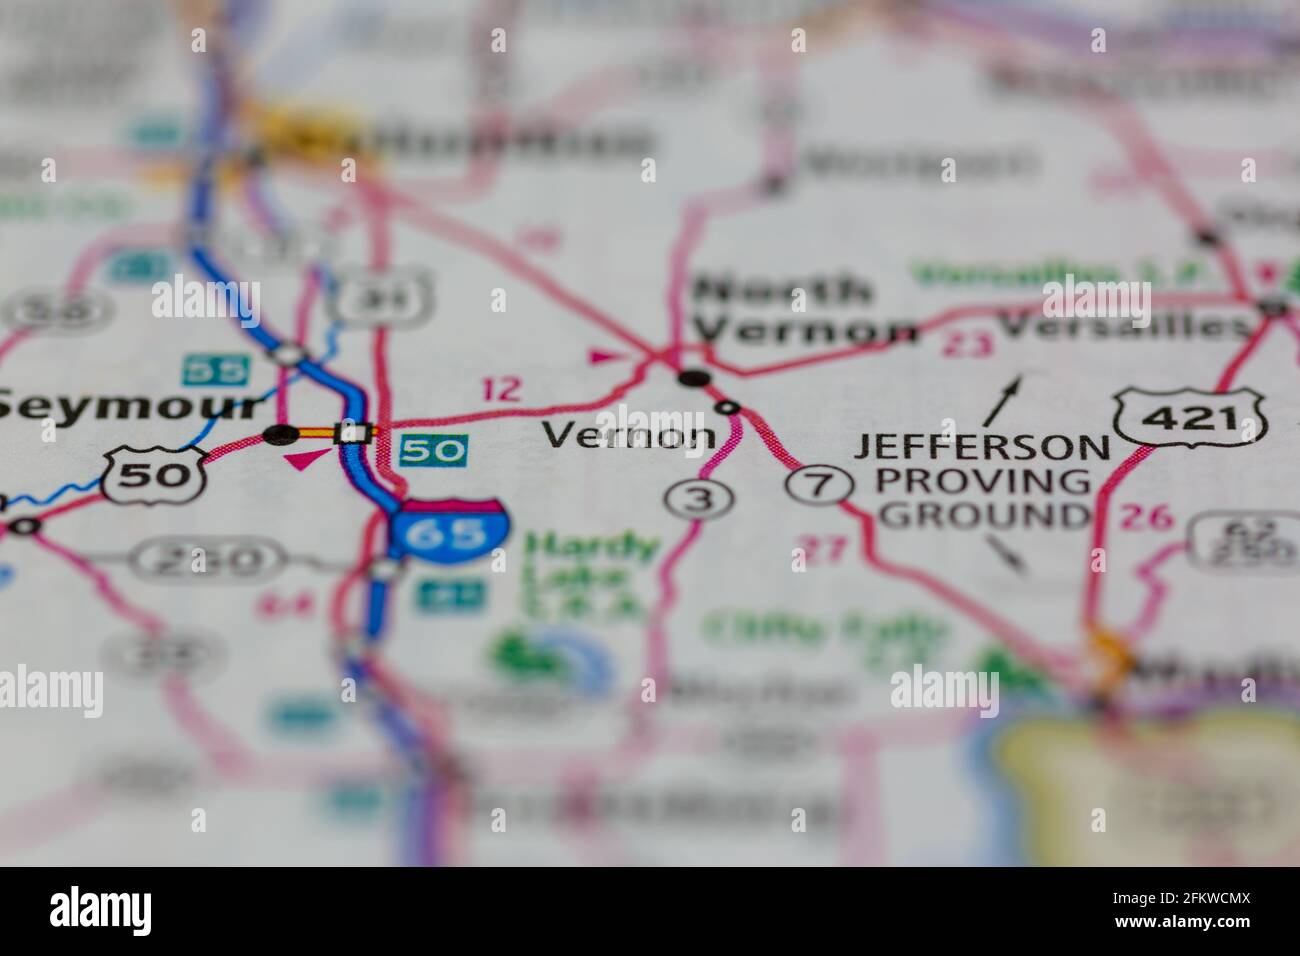 Vernon Indiana USA shown on a geography map or road map Stock Photo